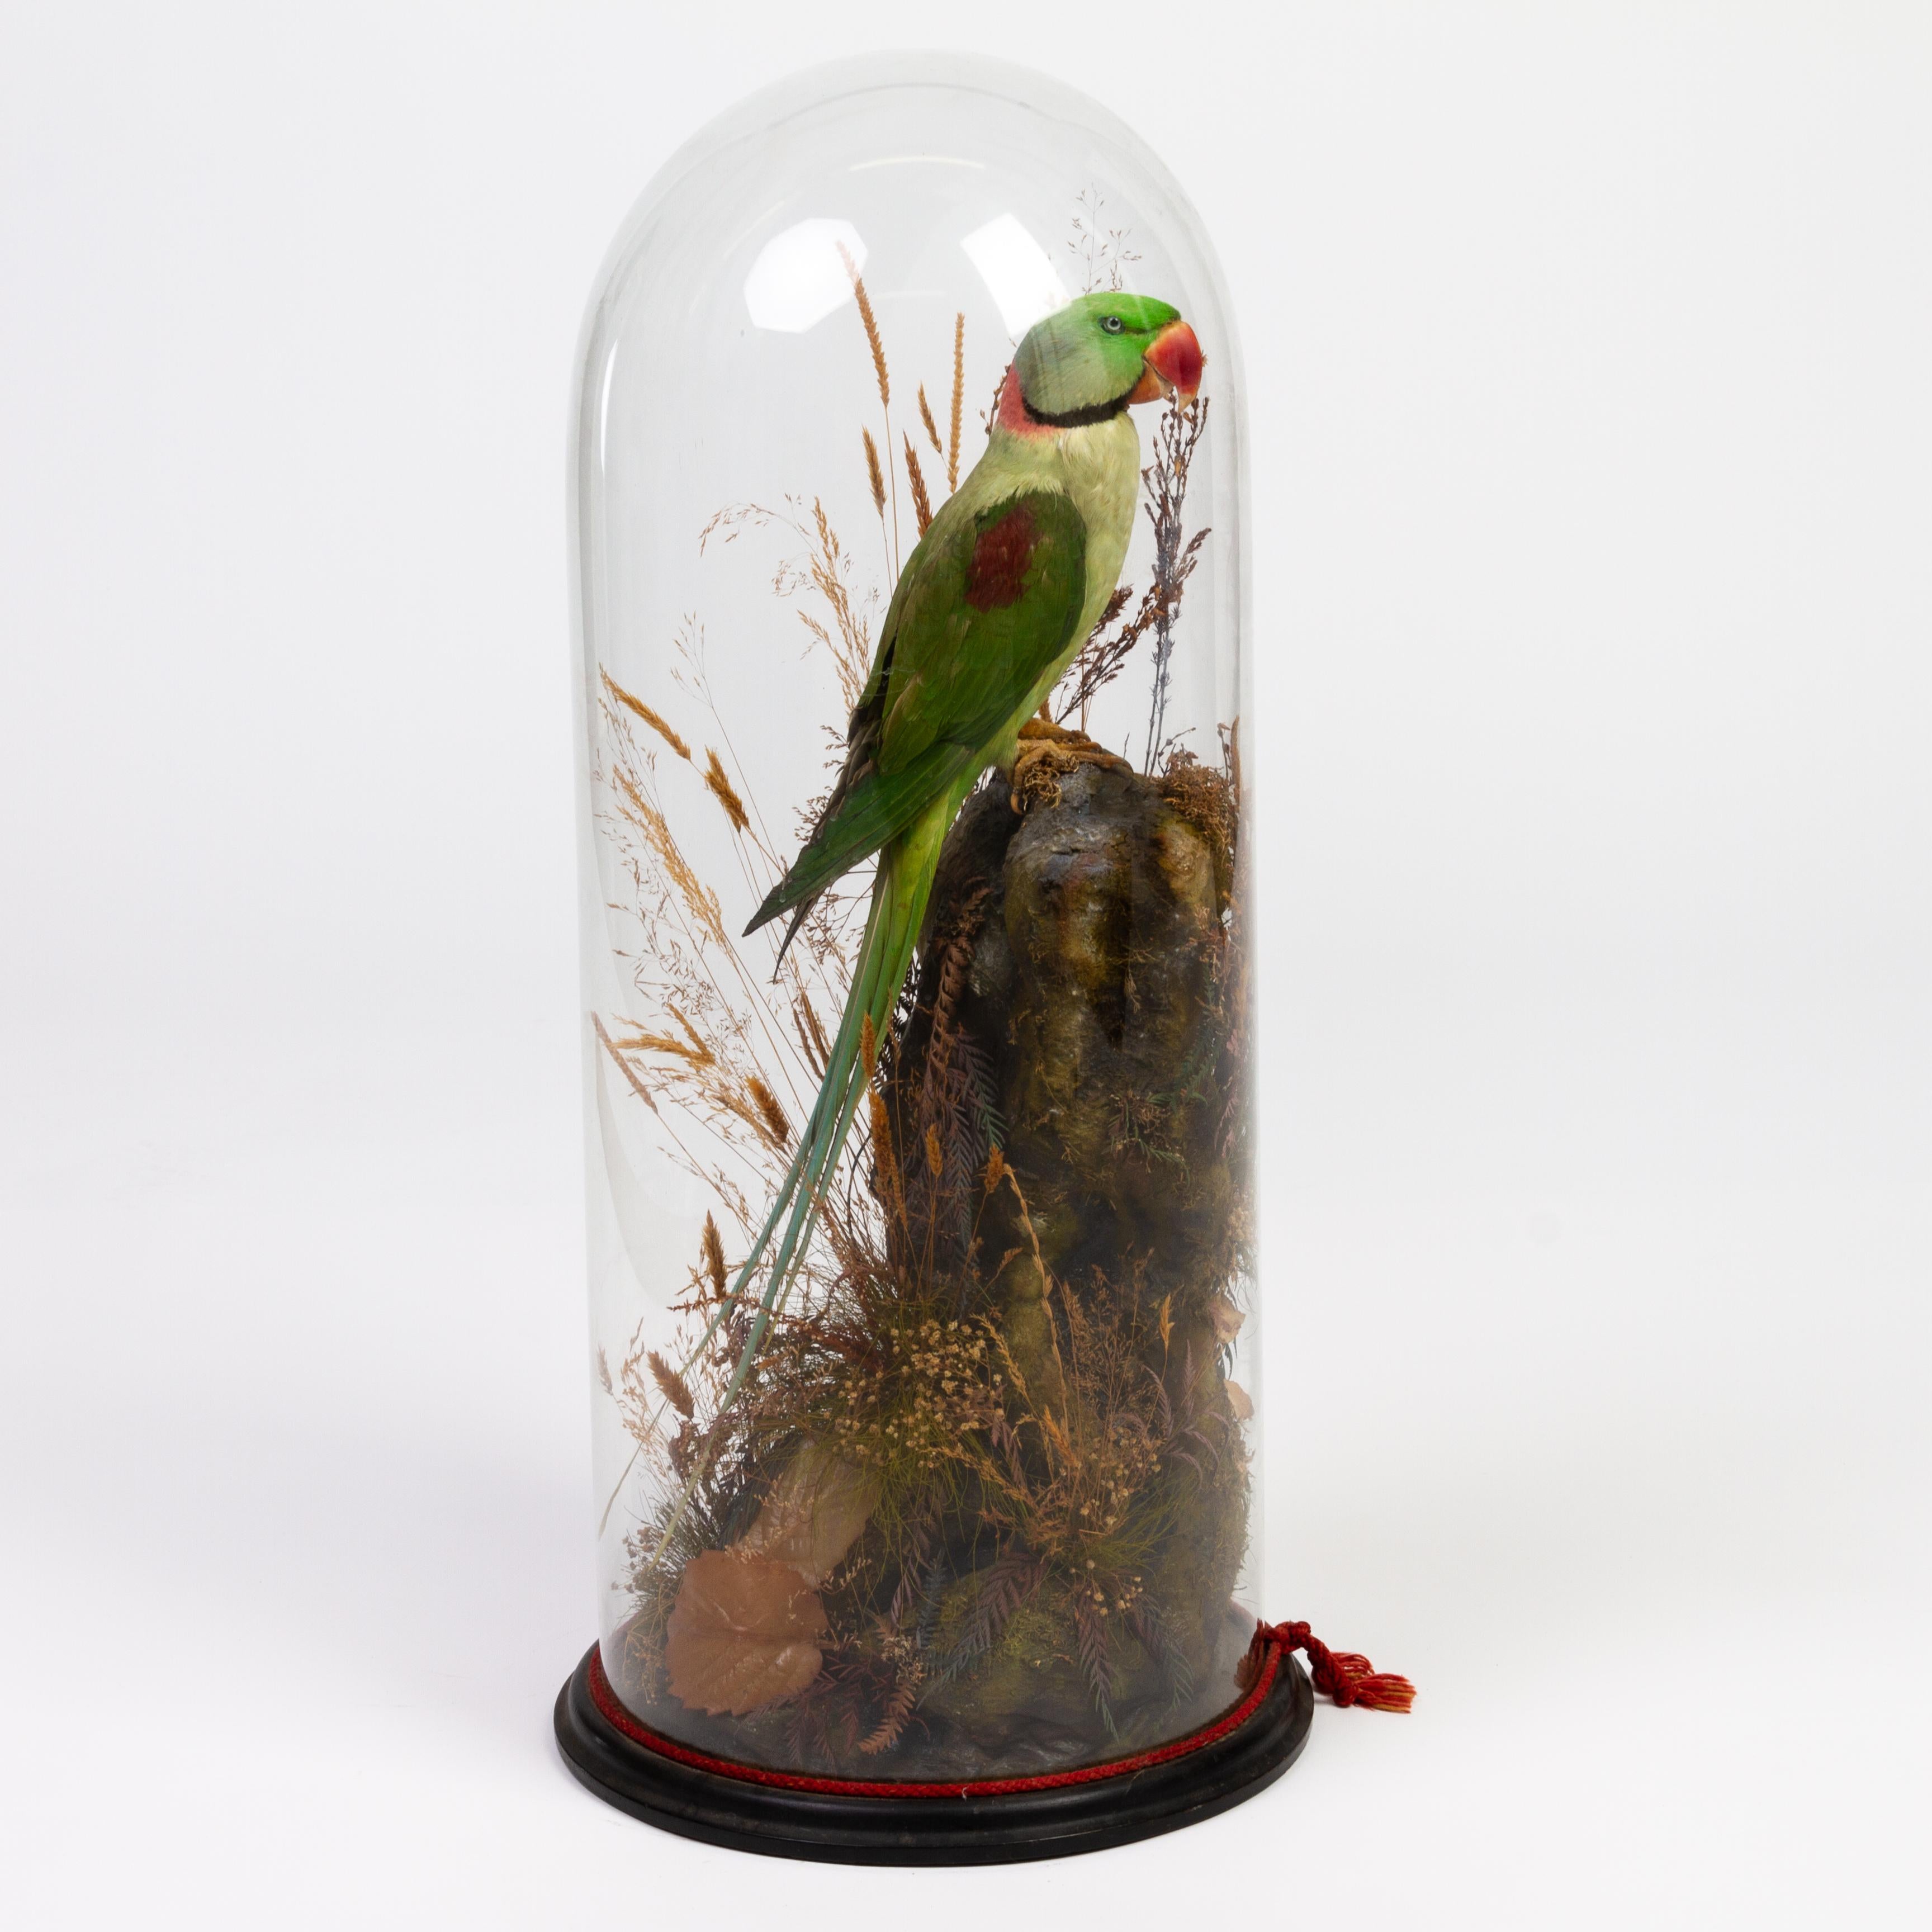 Indian Ring-Necked Victorian Taxidermy Parakeet Parrot Under Dome 19th Century  1